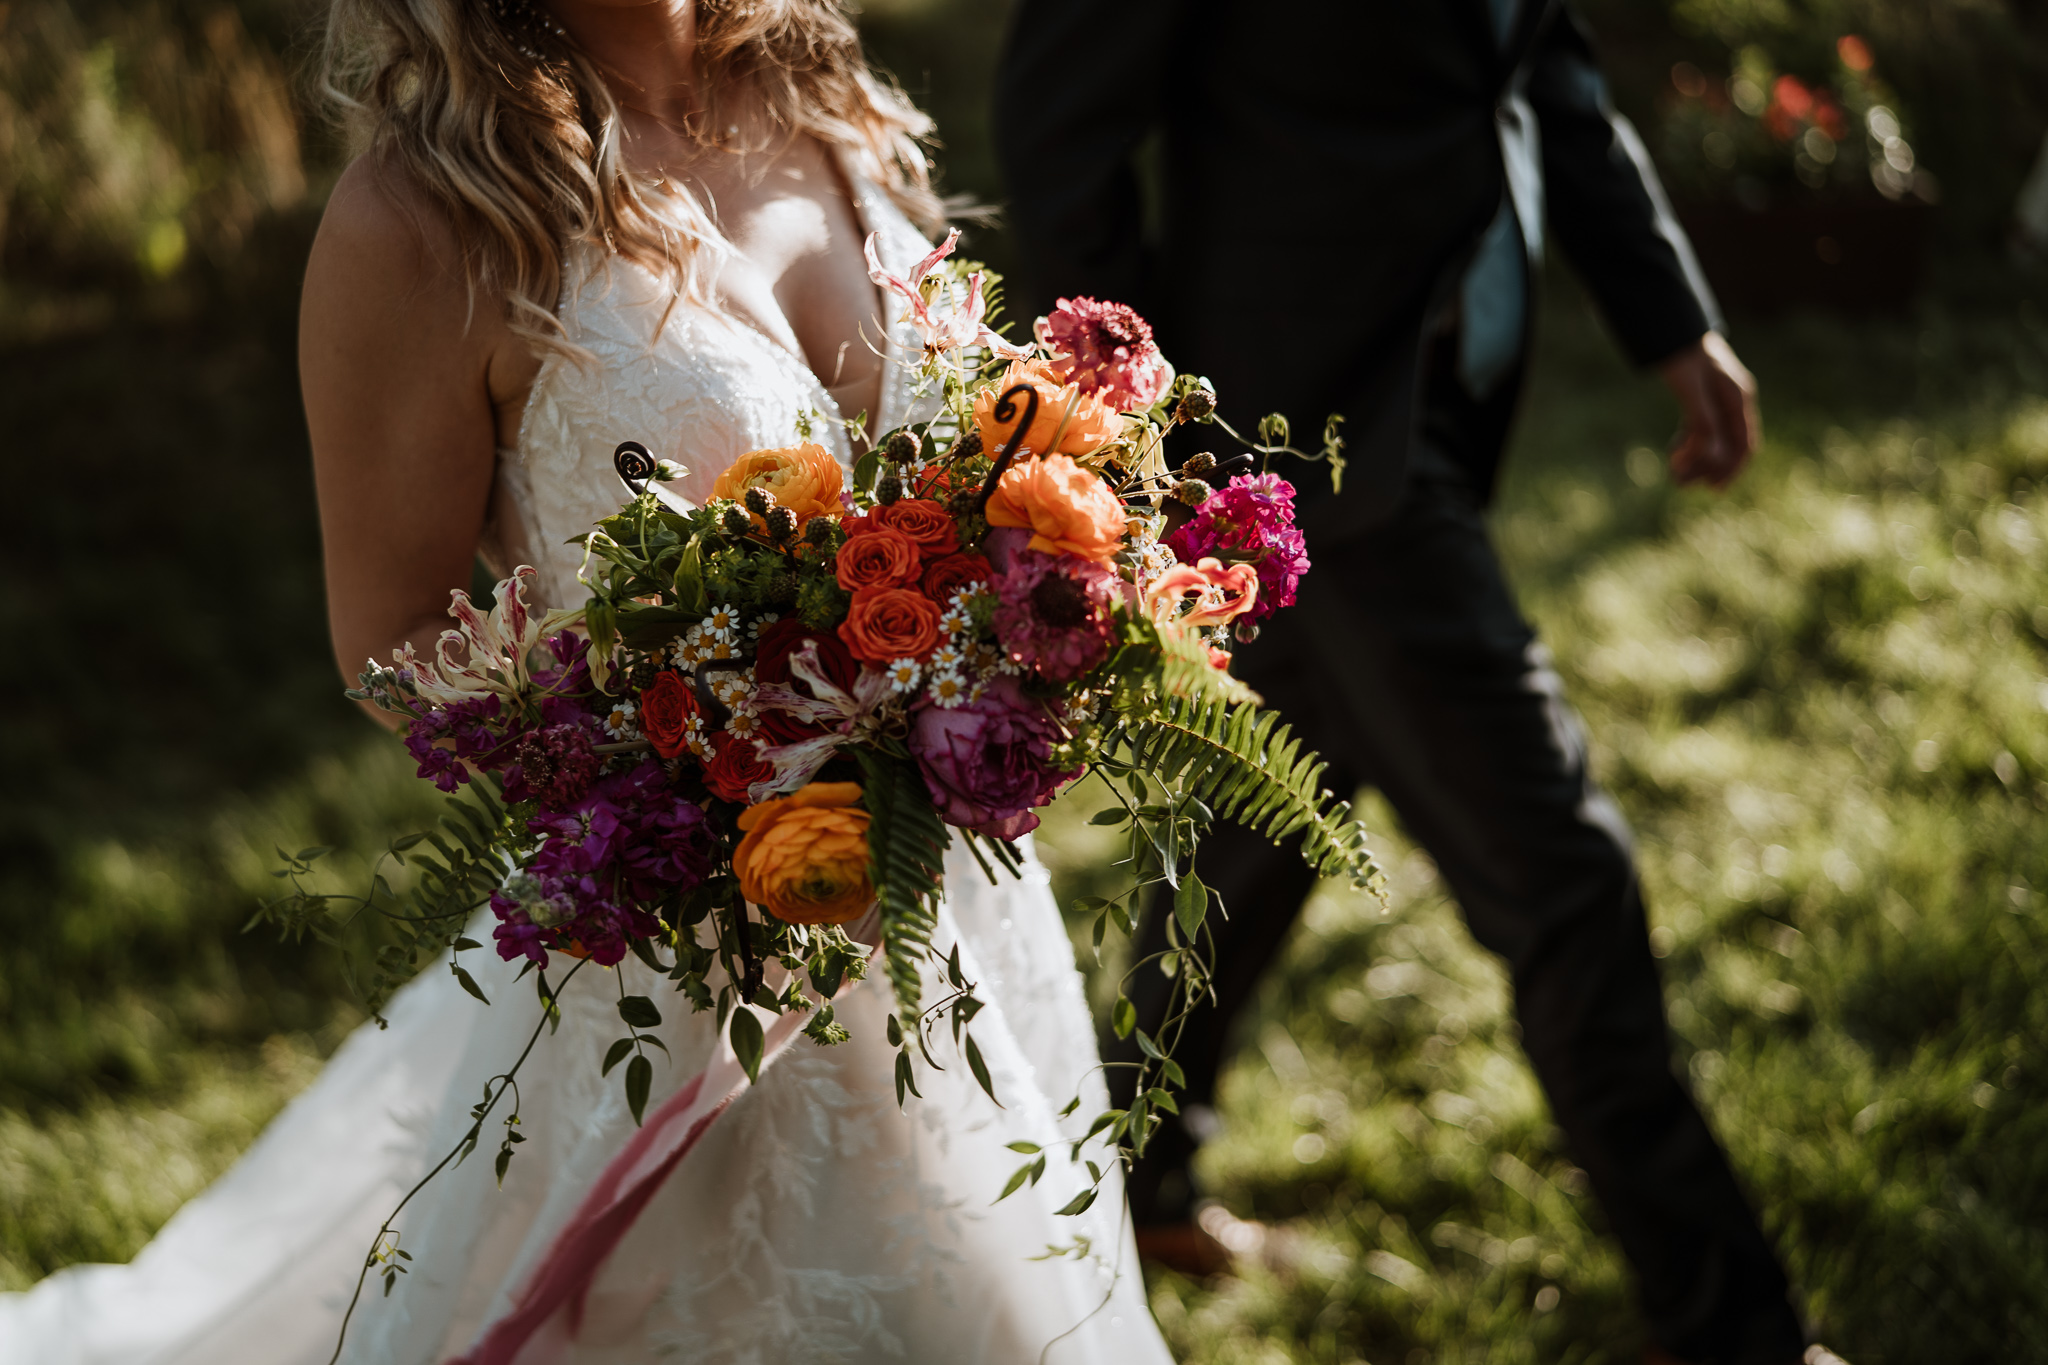 Wedding bouquet by Garden of Eden, photographed by Basecamp Visual.